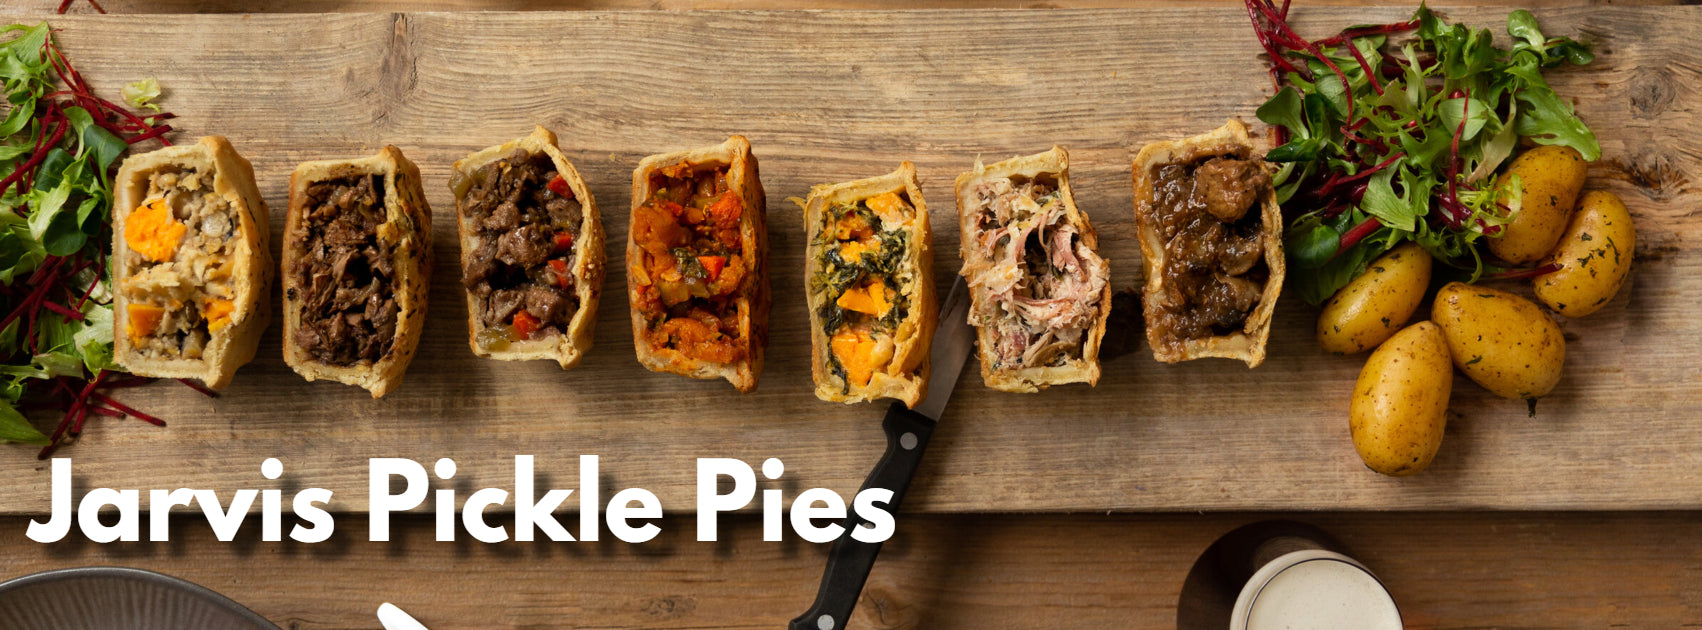 Jarvis Pickle Pies available in Norfolk